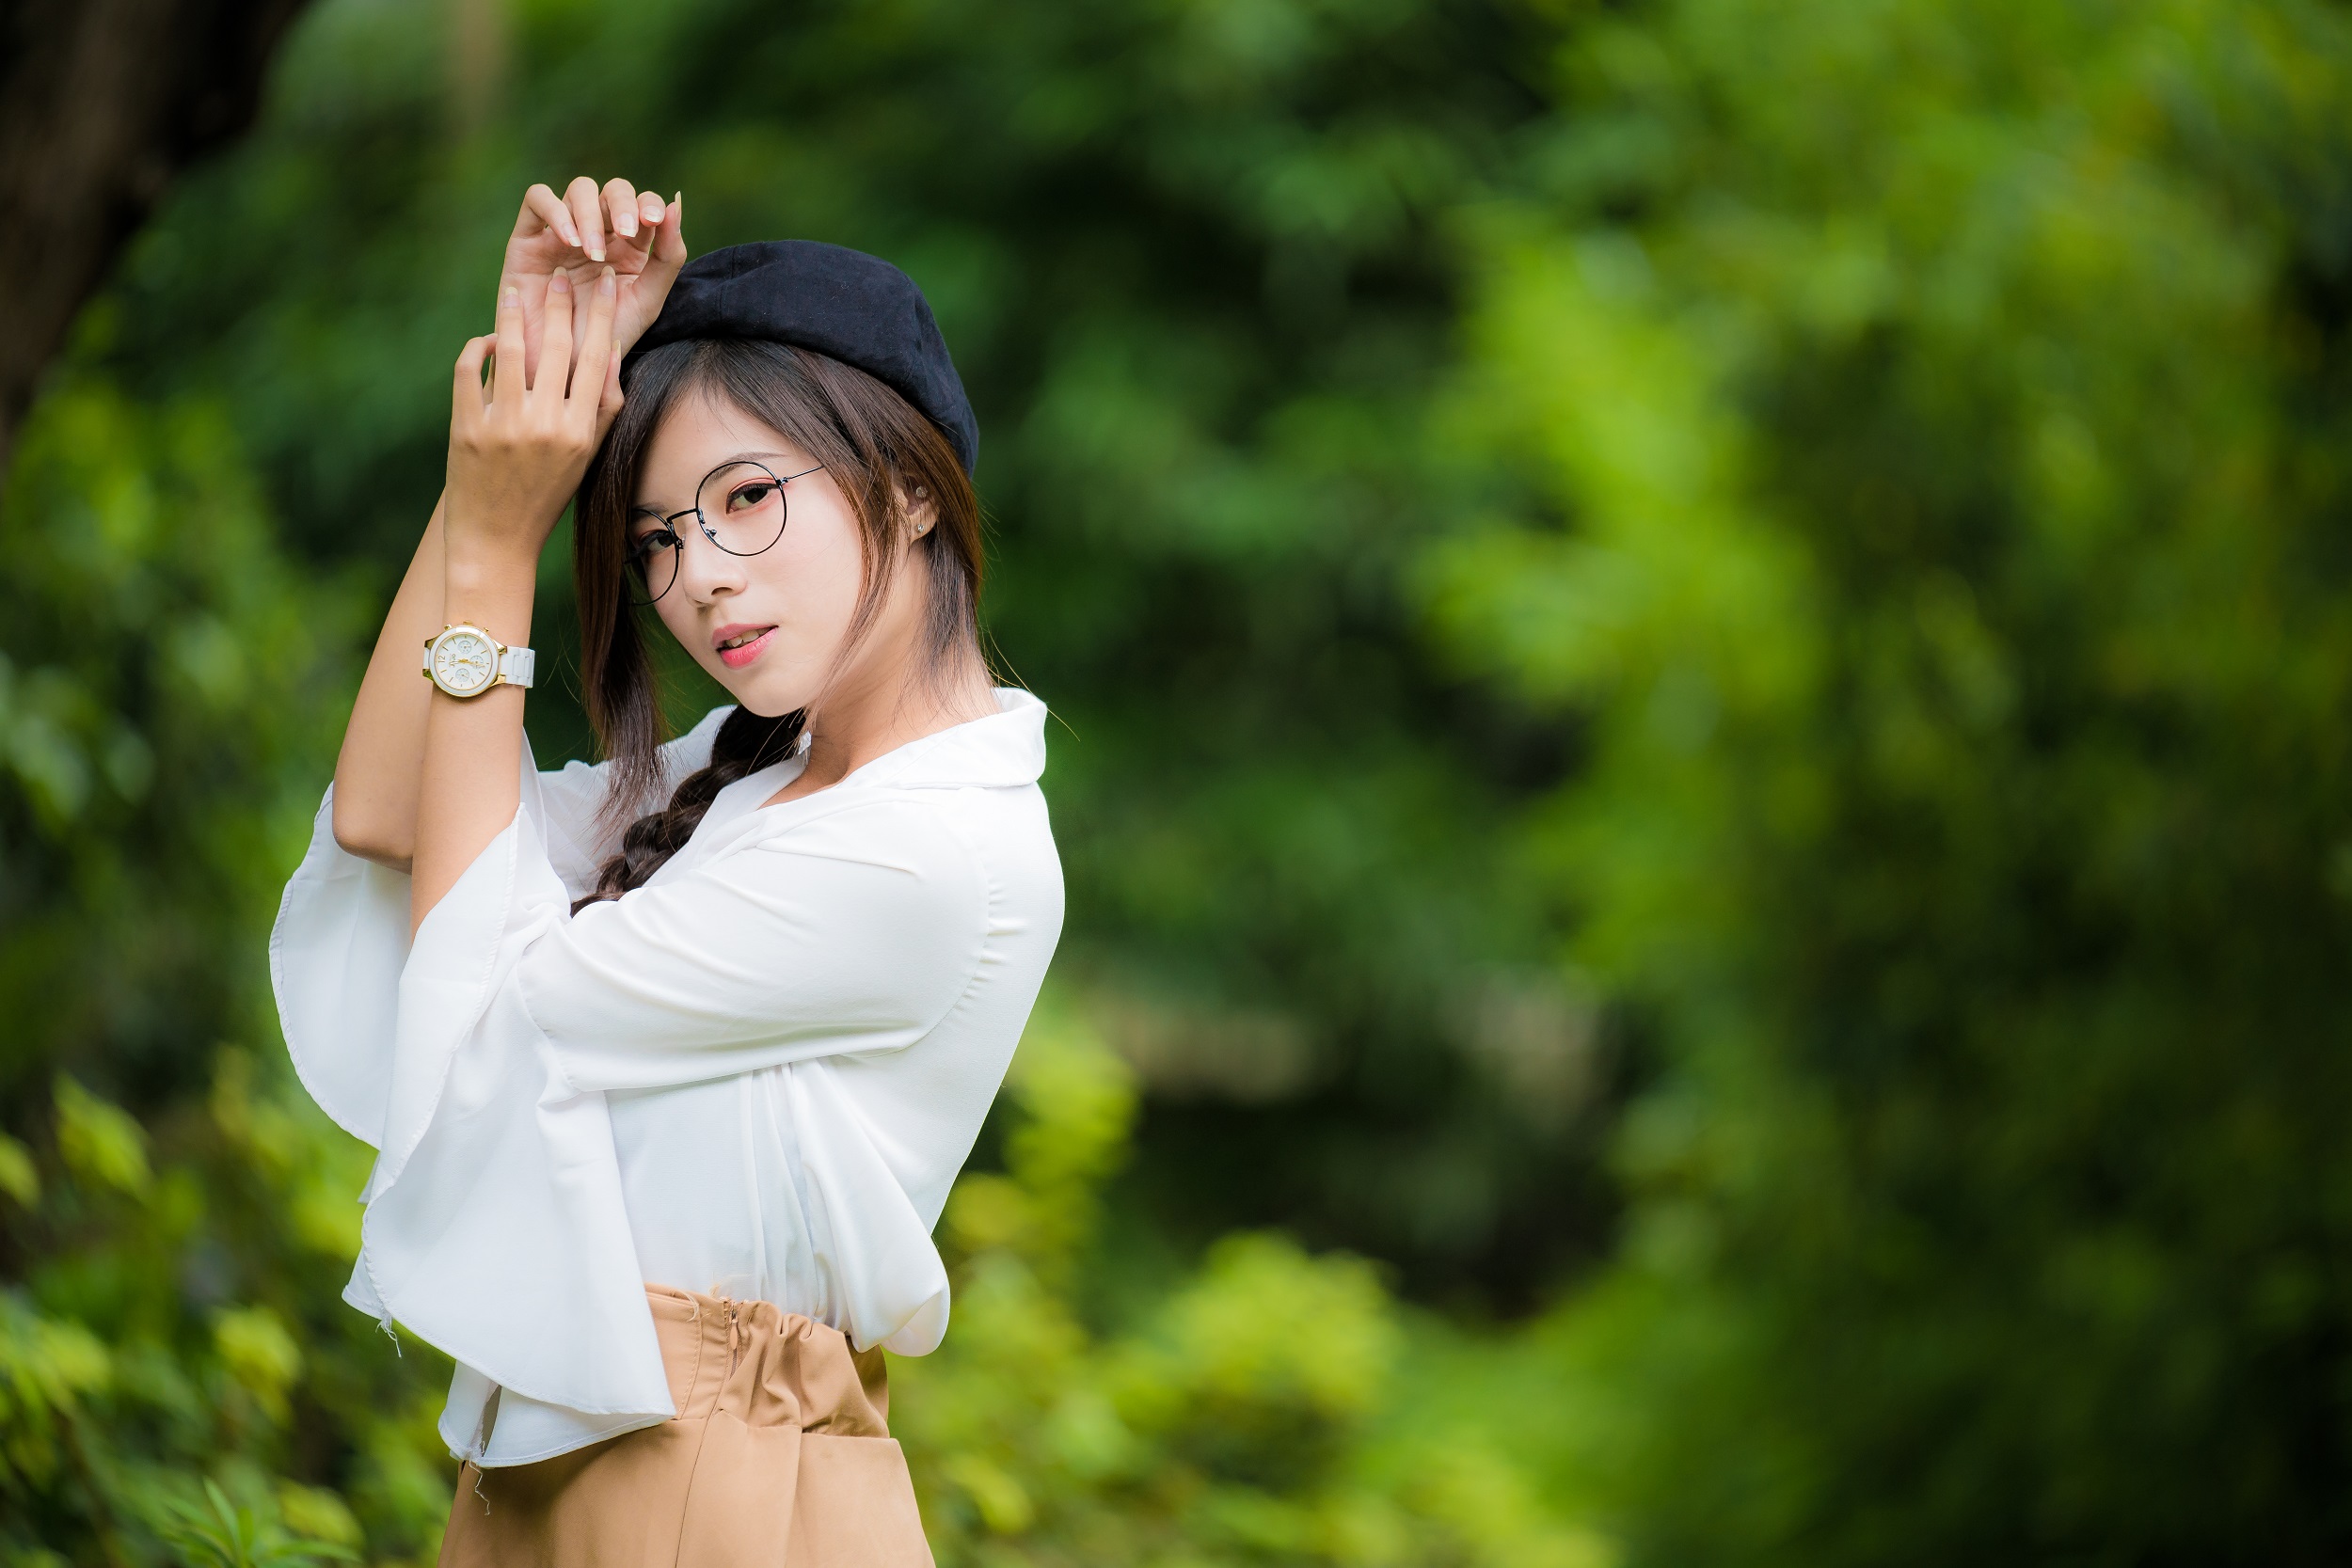 Women Model Asian Looking At Viewer Shirt Women With Glasses Glasses Watches Berets Brunette Women O 2500x1667